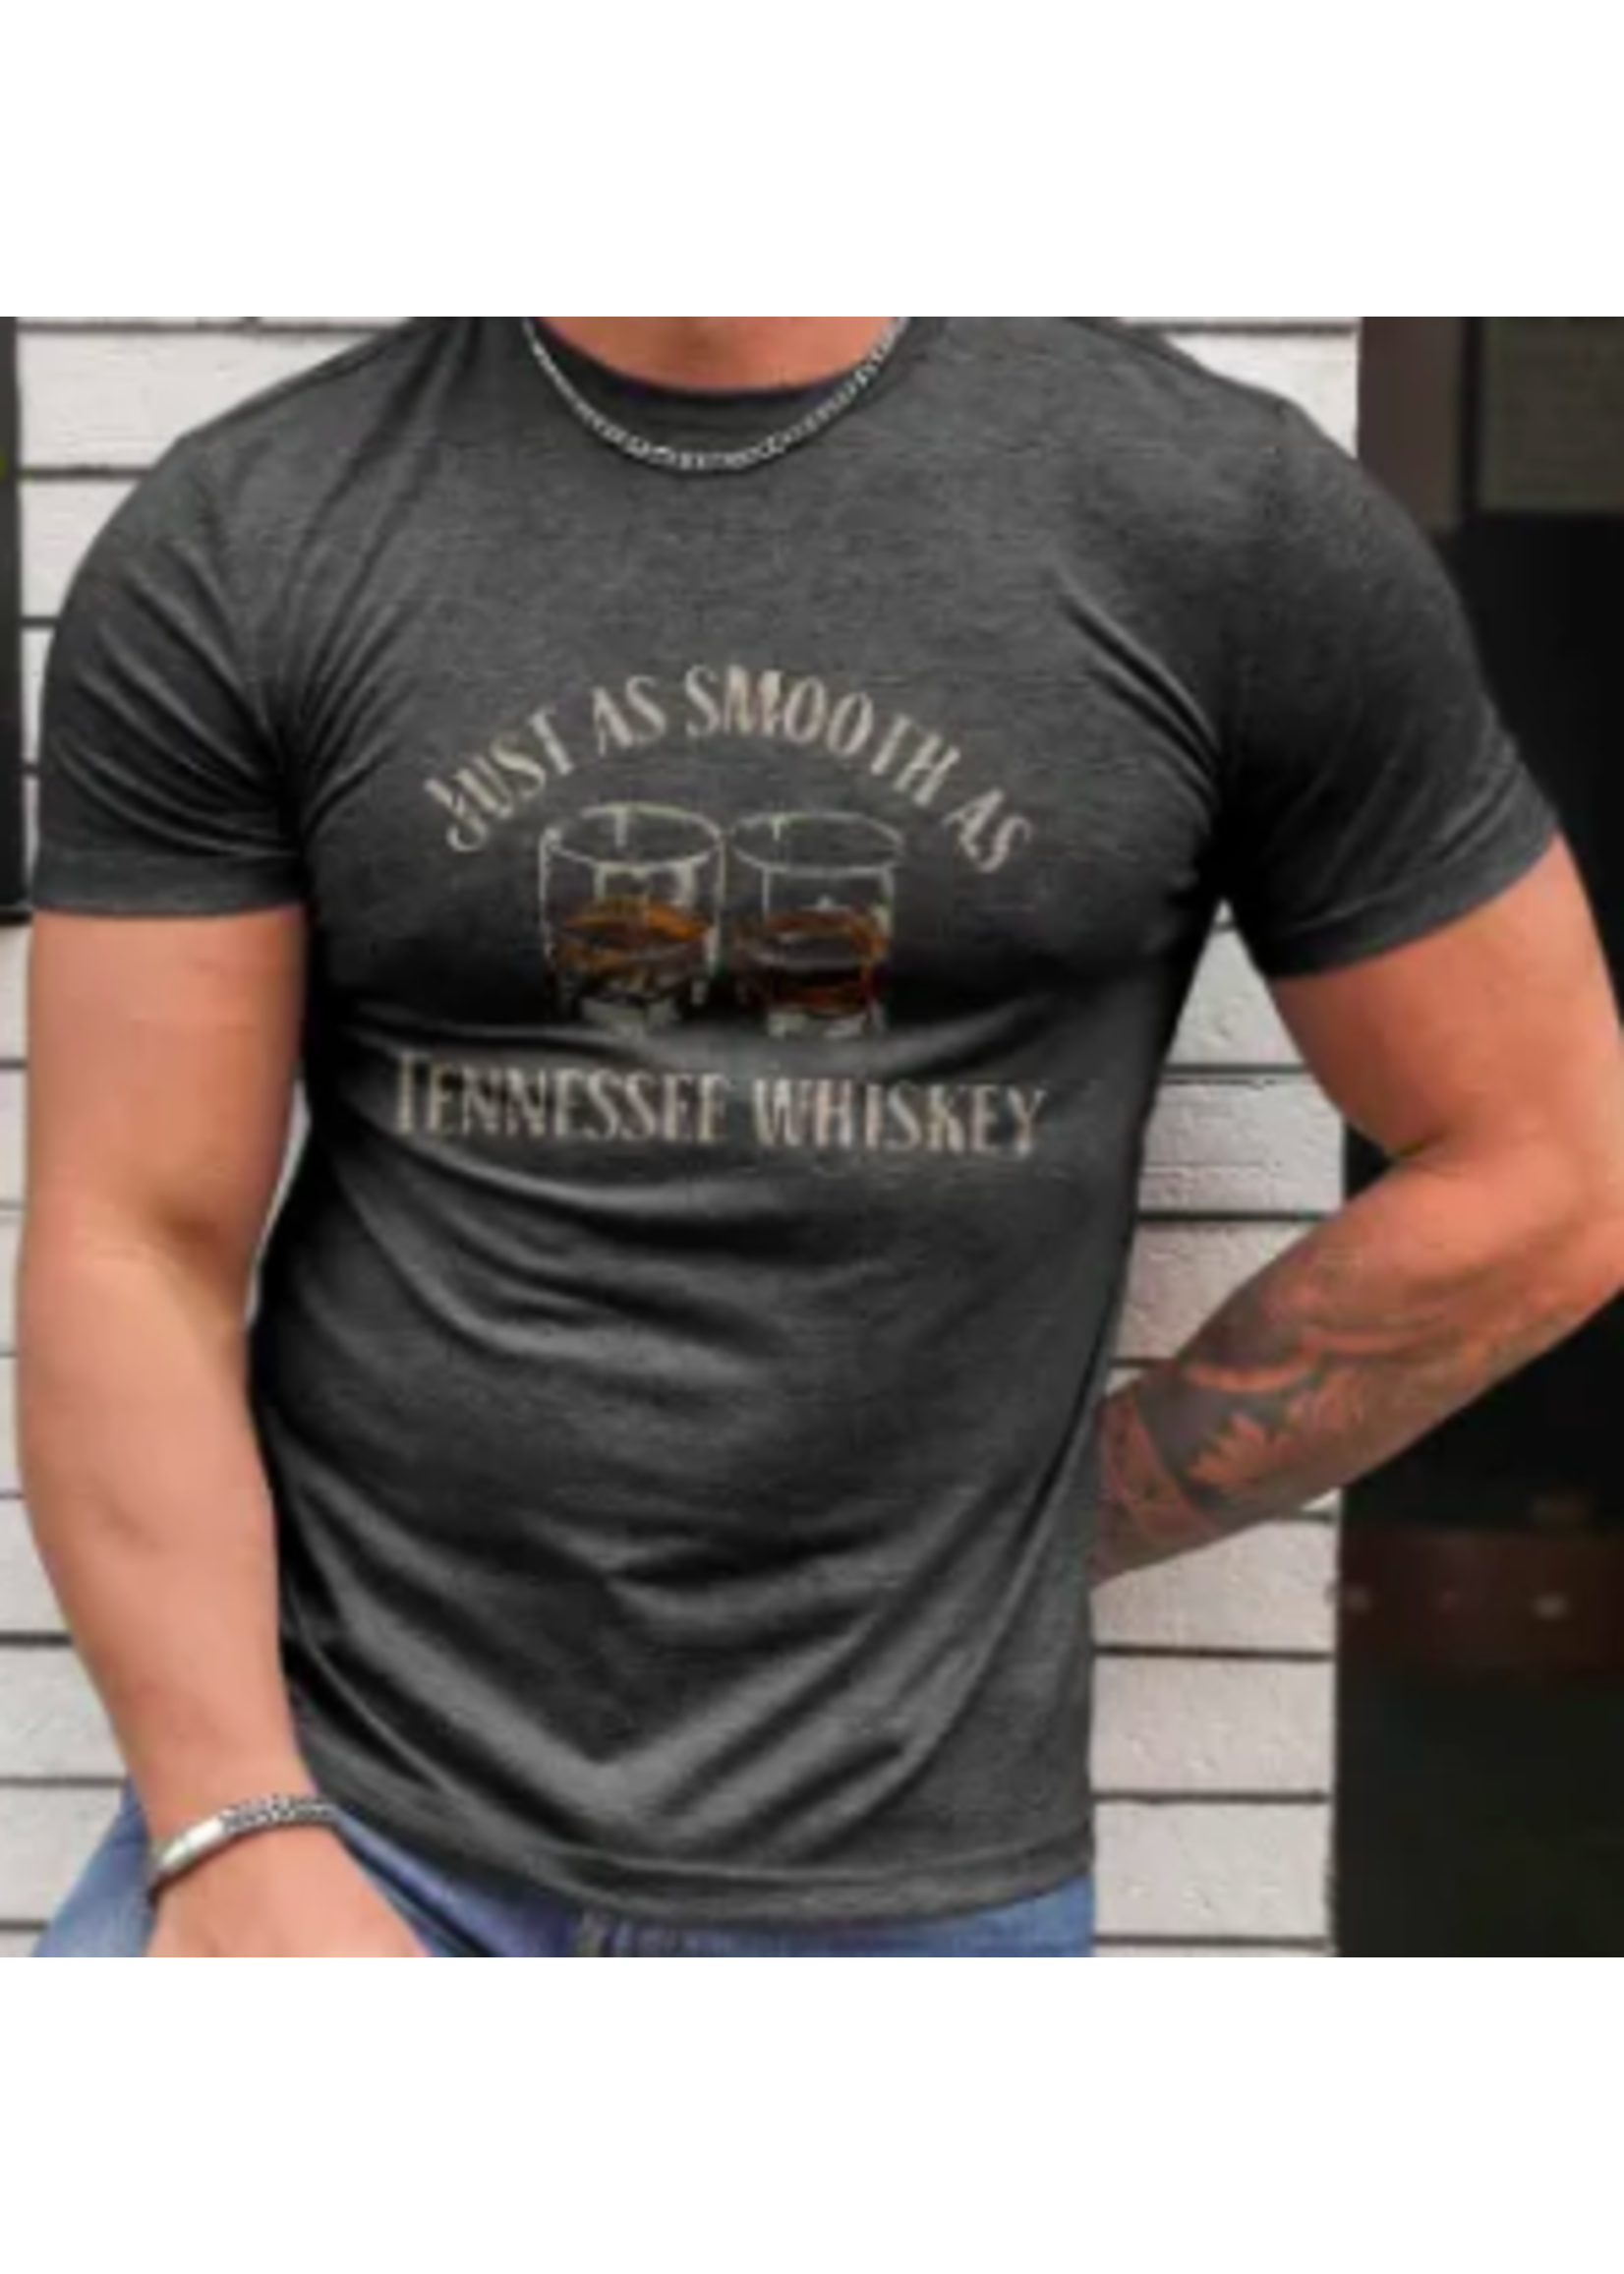 Gray JUST AS SMOOTH AS TENNESSEE WHISKEY Graphic Tee